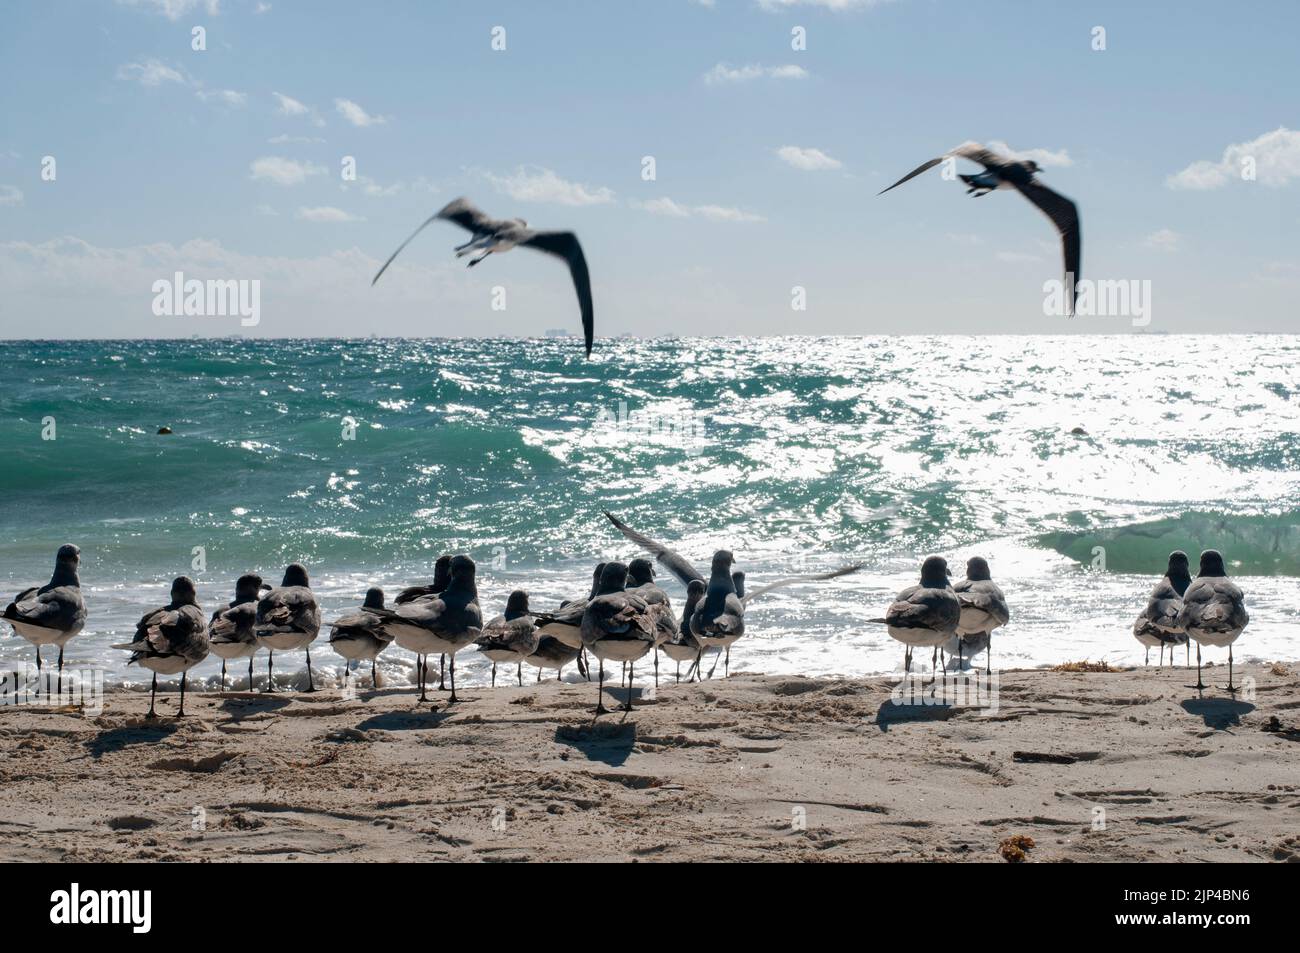 A blurred group of seagulls rests on a tropical beach, with selective focus. Riviera Maya Mexico. Stock Photo